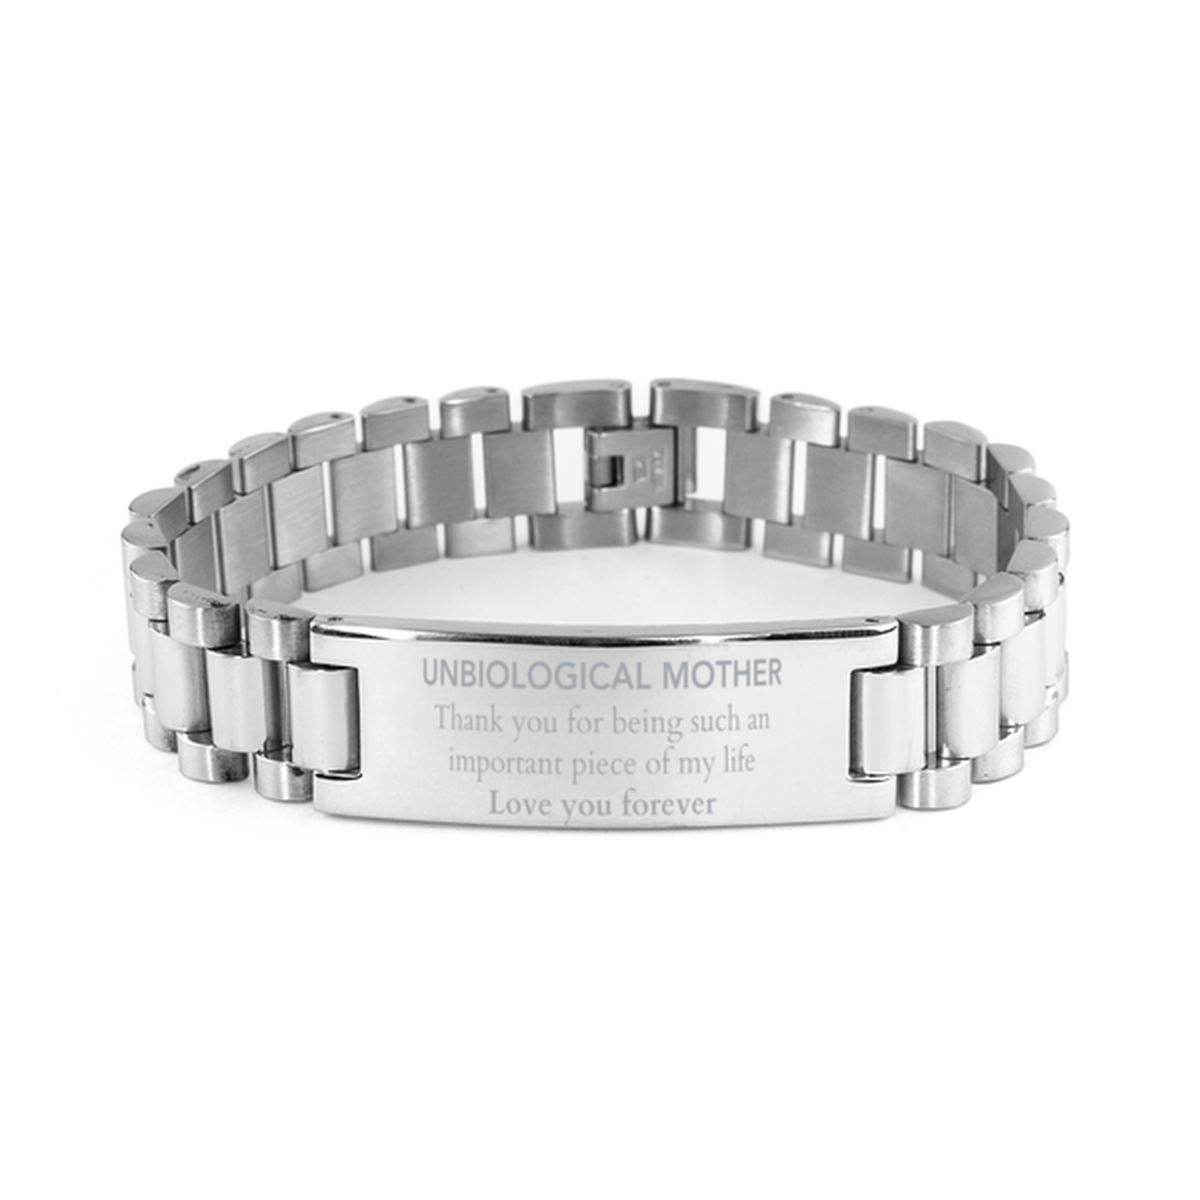 Appropriate Unbiological Mother Ladder Stainless Steel Bracelet Epic Birthday Gifts for Unbiological Mother Thank you for being such an important piece of my life Unbiological Mother Christmas Mothers Fathers Day